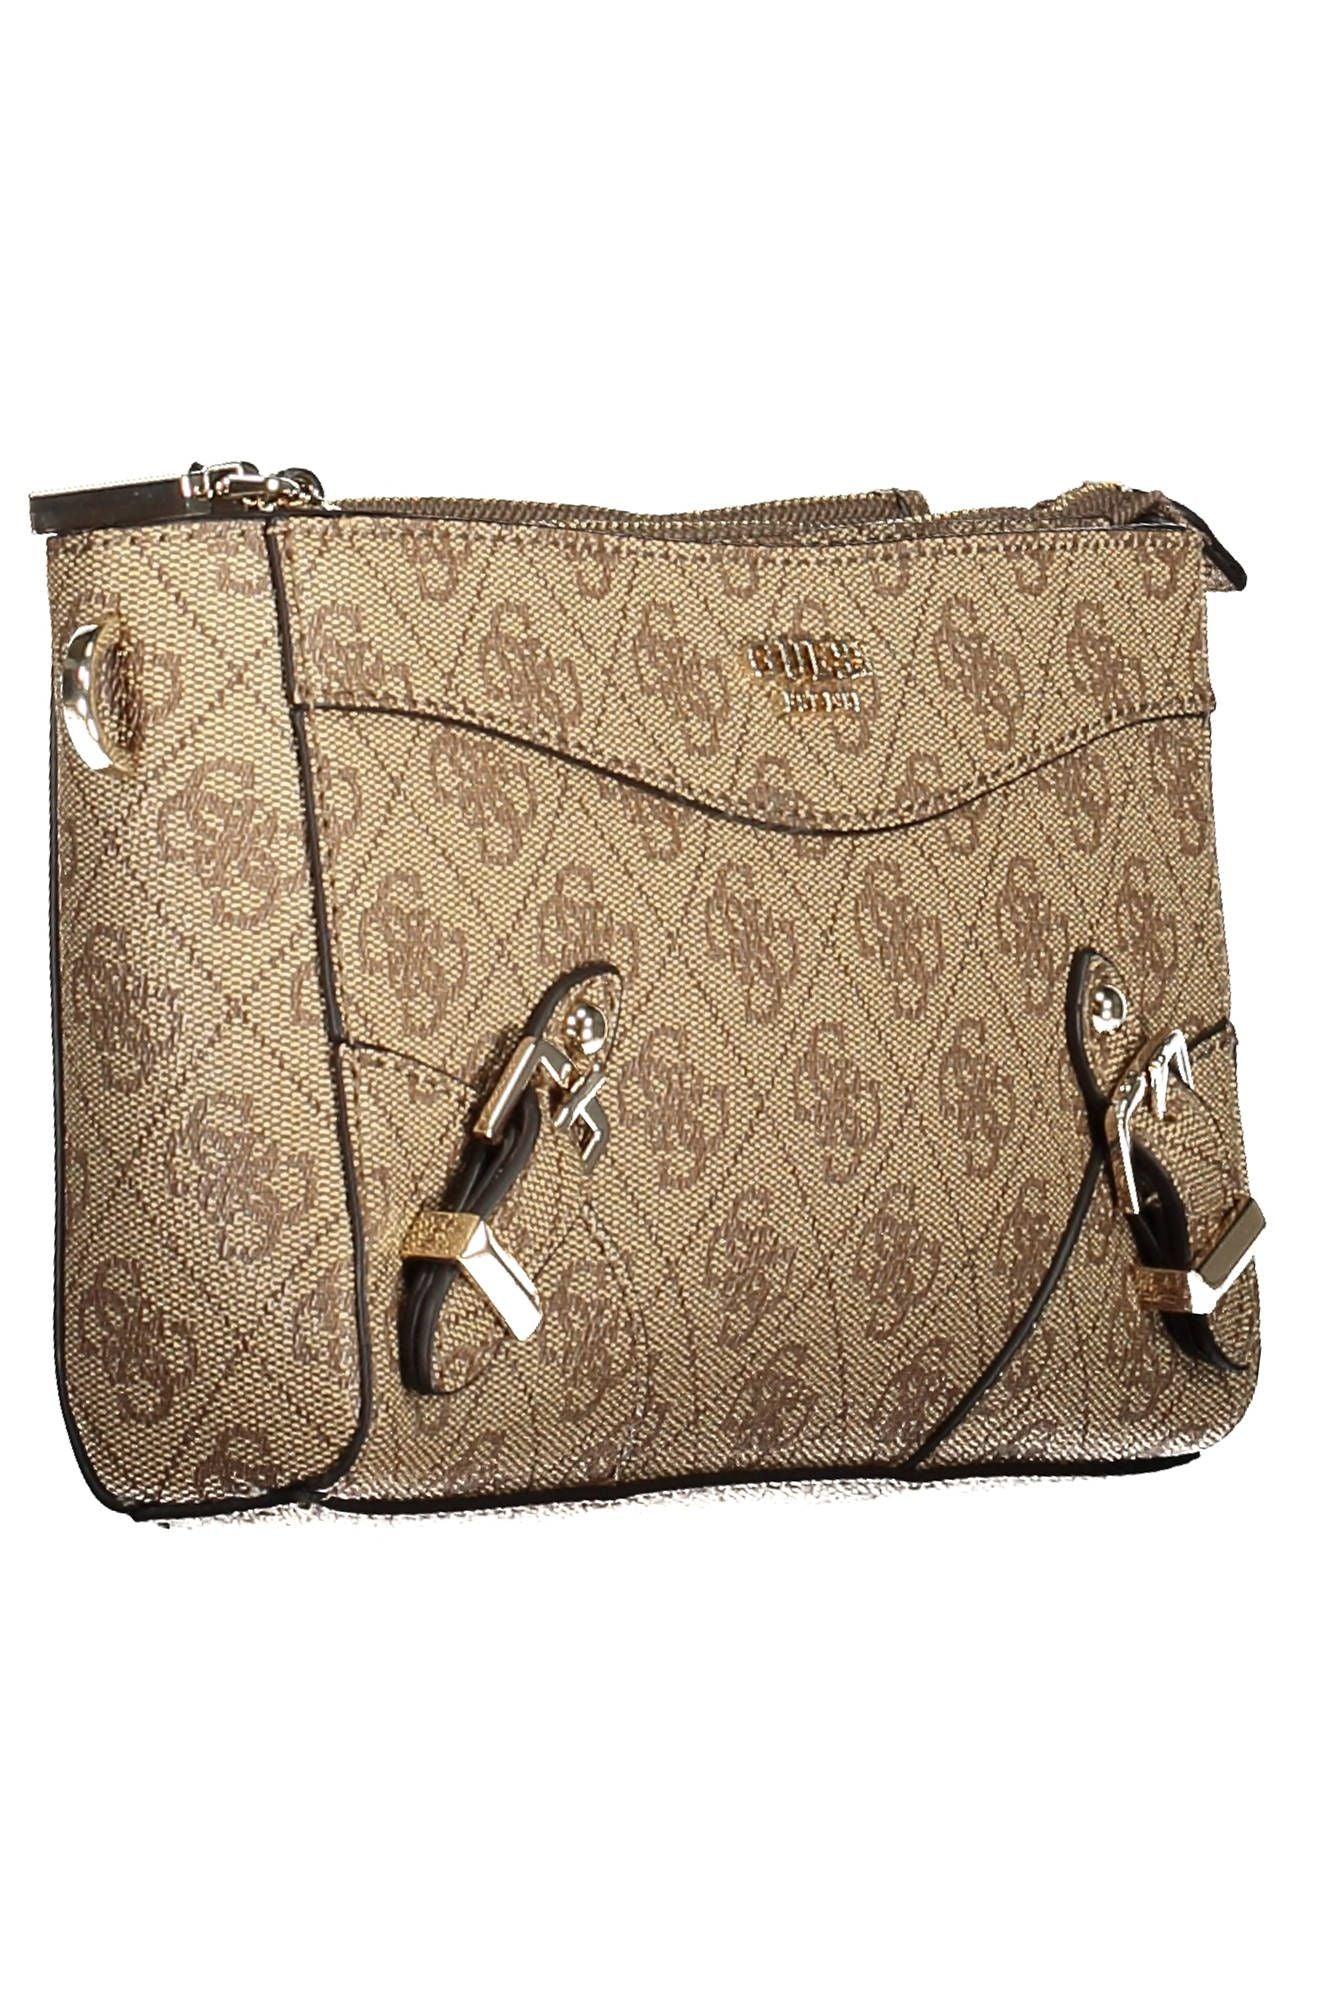 Guess Jeans Chic Beige Shoulder Bag with Contrasting Details - PER.FASHION